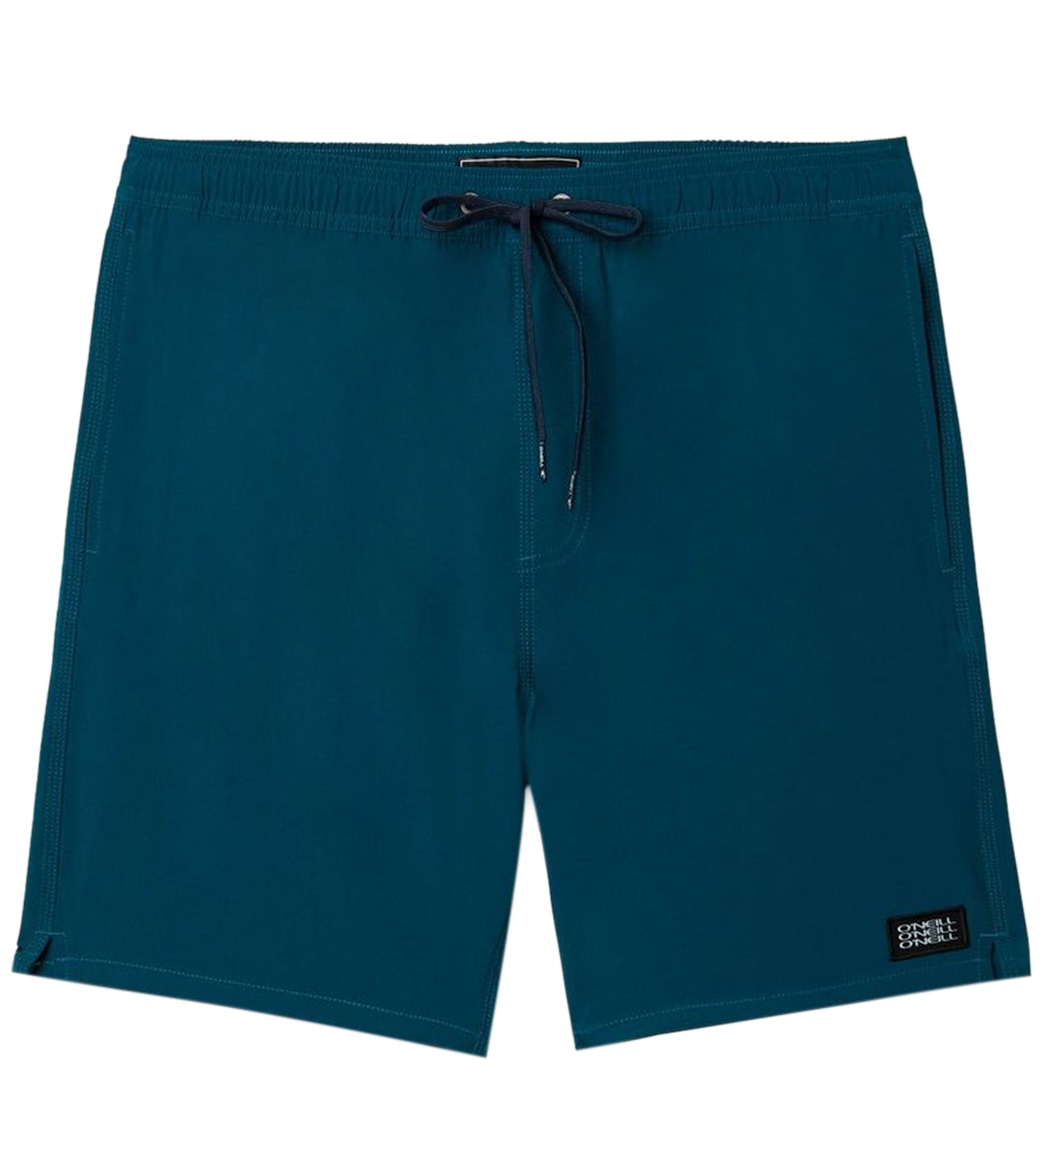 O'neill Men's 17 Solid Volley Short - Dark Blue Large Polyester - Swimoutlet.com